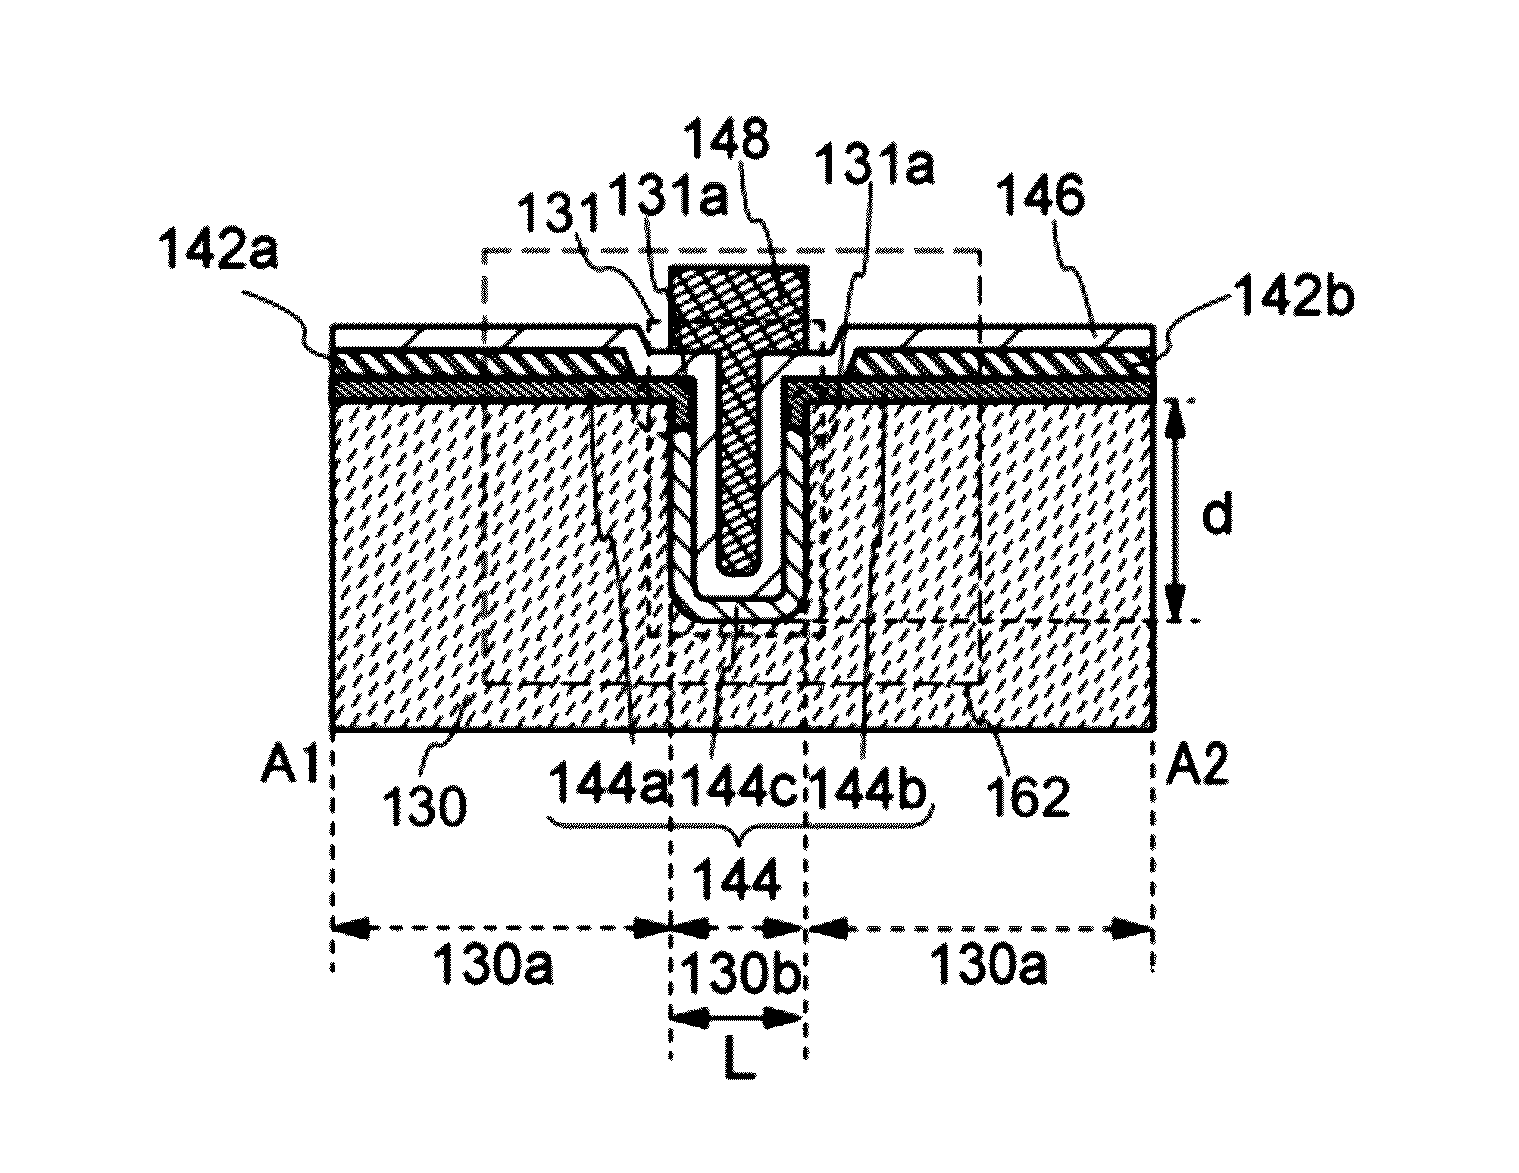 Semiconductor device having a trenched insulating layer coated with an oxide semiconductor film